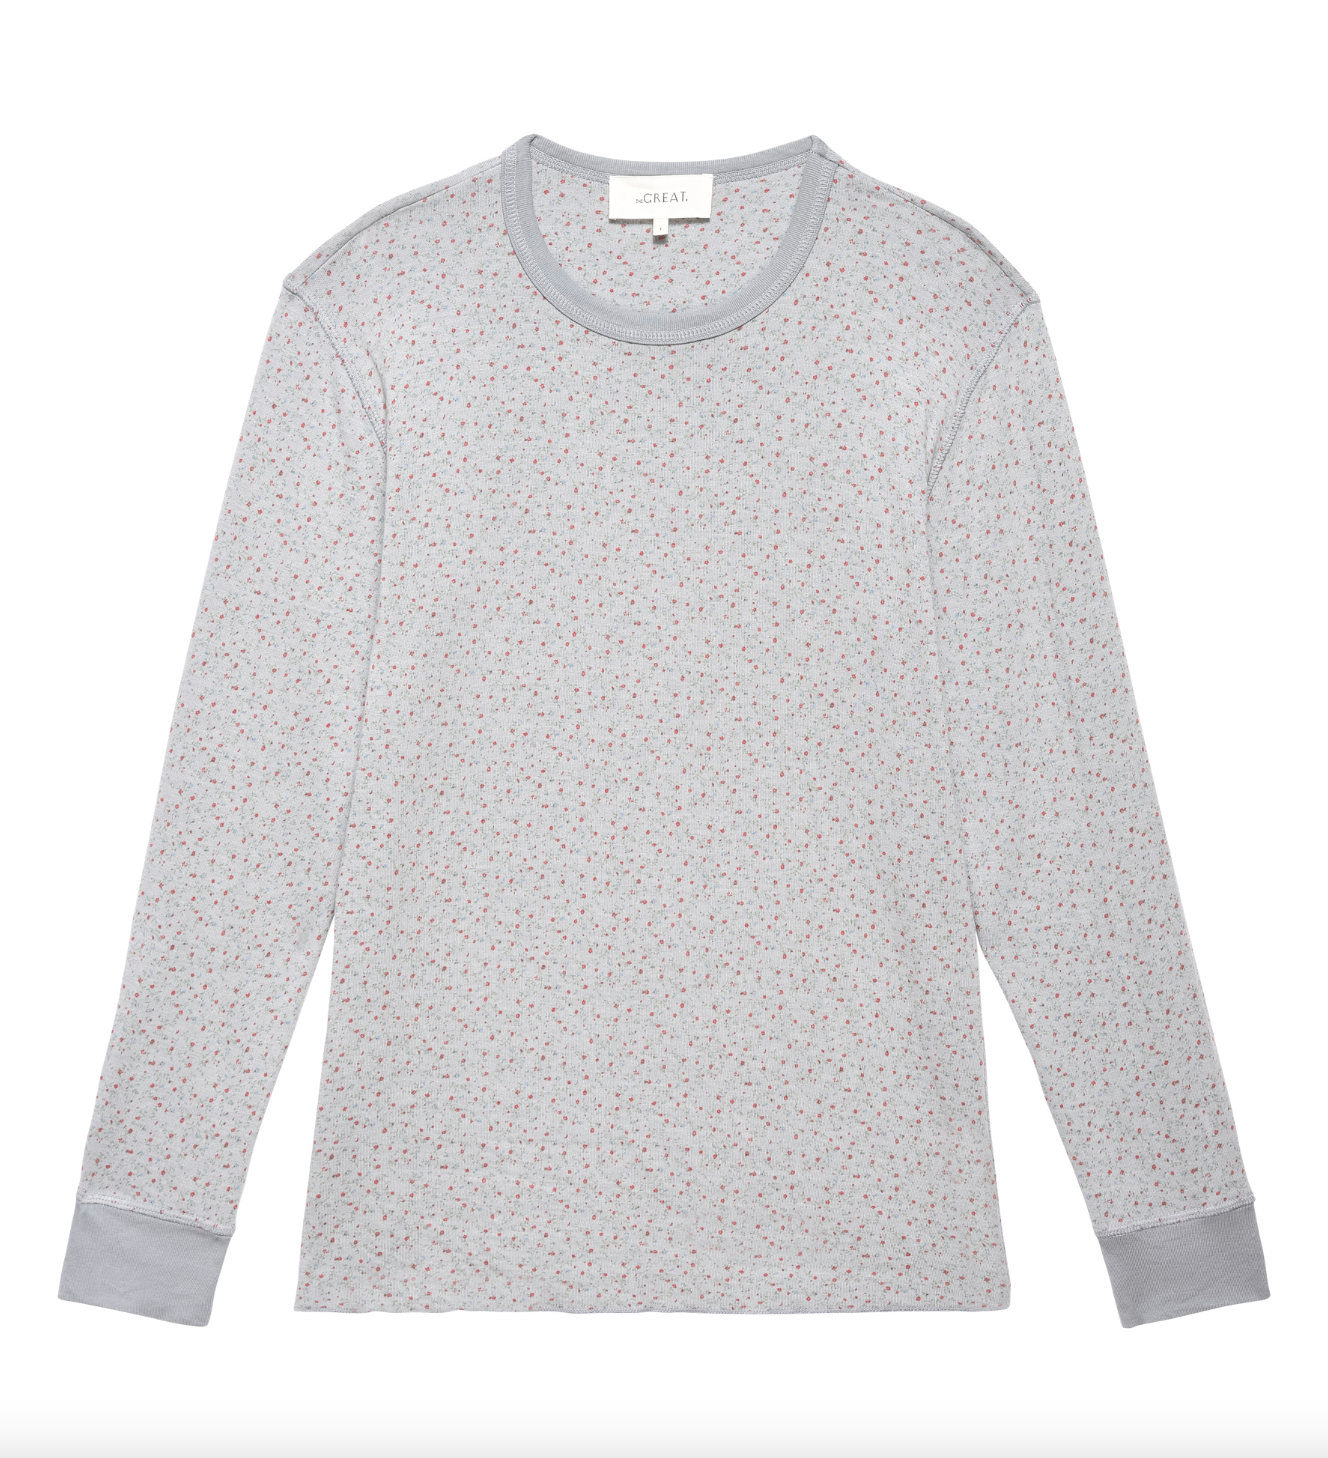 A light gray long-sleeve shirt with a subtle speckled pattern featuring small, multicolored dots. The collar and cuffs are slightly darker gray, reminiscent of a cozy Scottsdale bungalow. A label is visible at the inside back of the collar. Introducing THE SURPLUS CREW BLUEBELL GREENHOUSE FLORAL by The Great Inc.